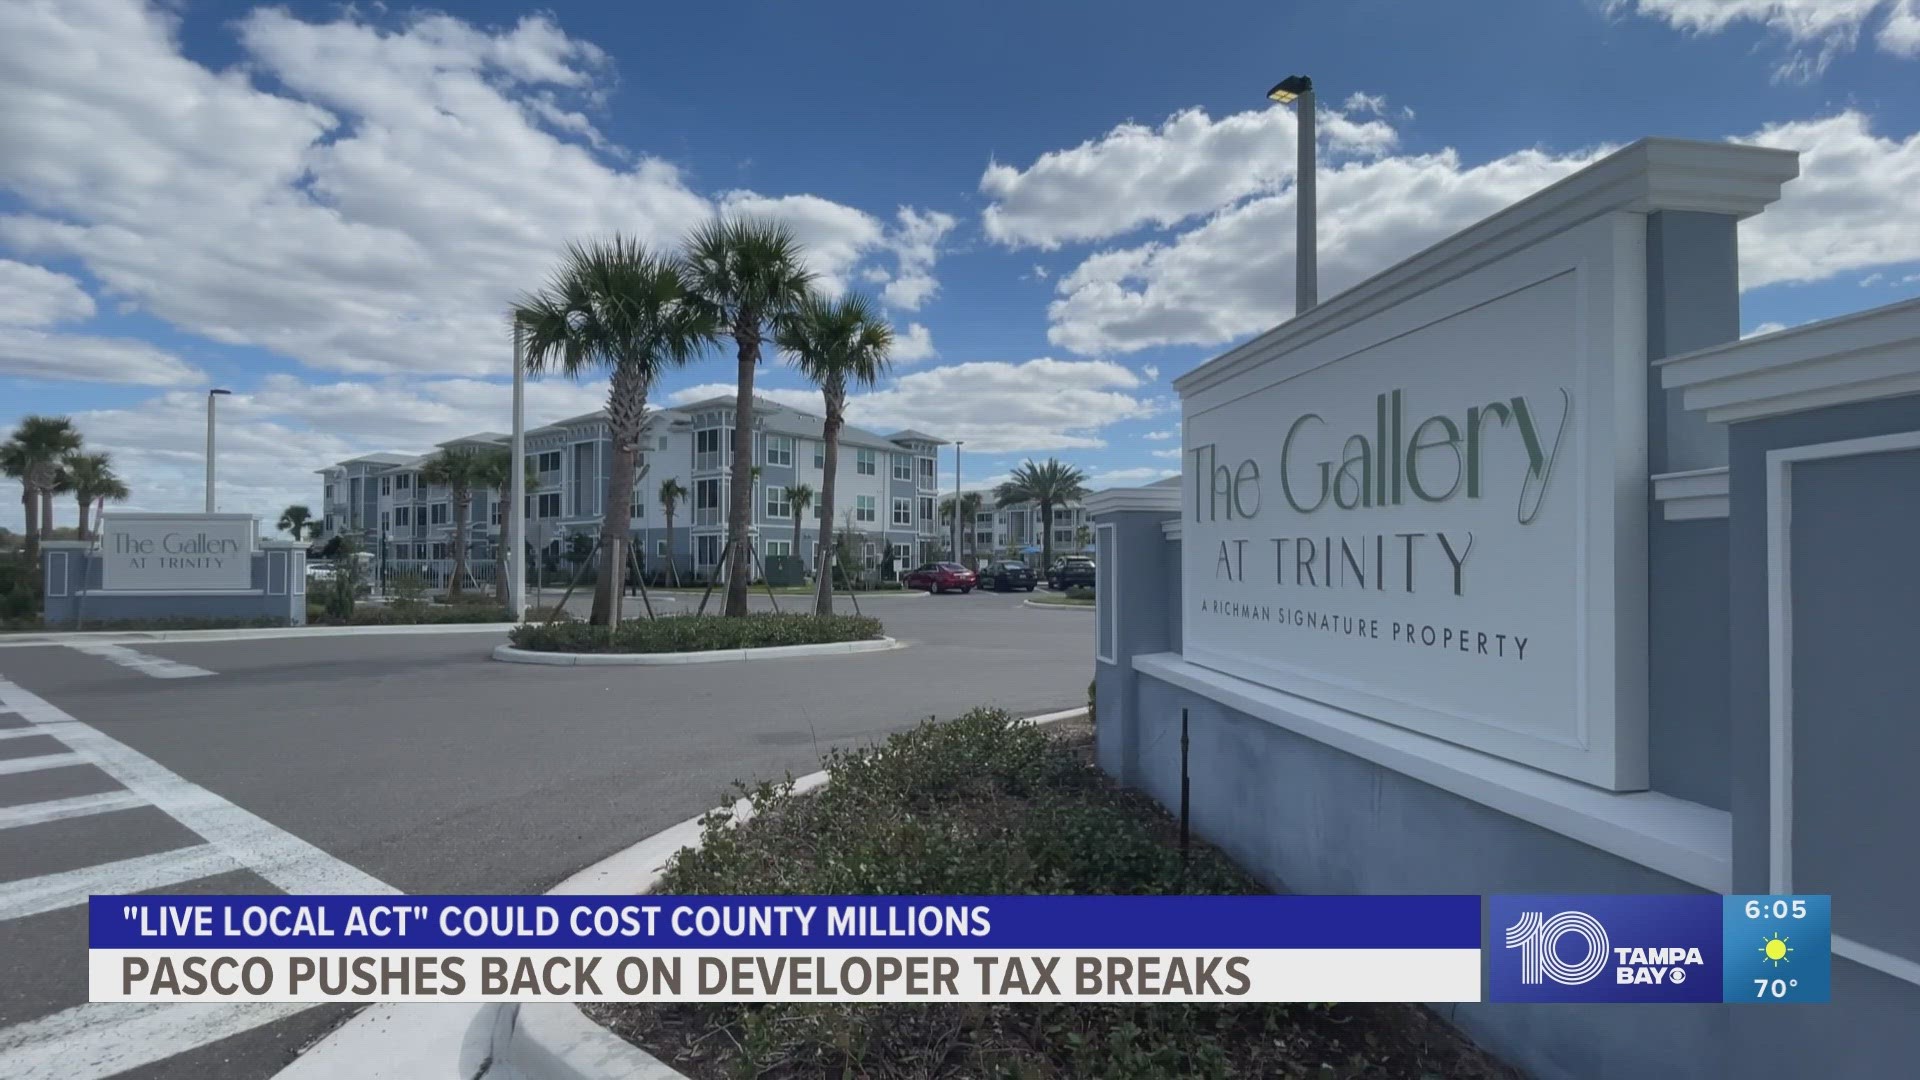 Pasco County officials say tax breaks could cost them millions in revenue, impacting budgets for schools, police and fire.